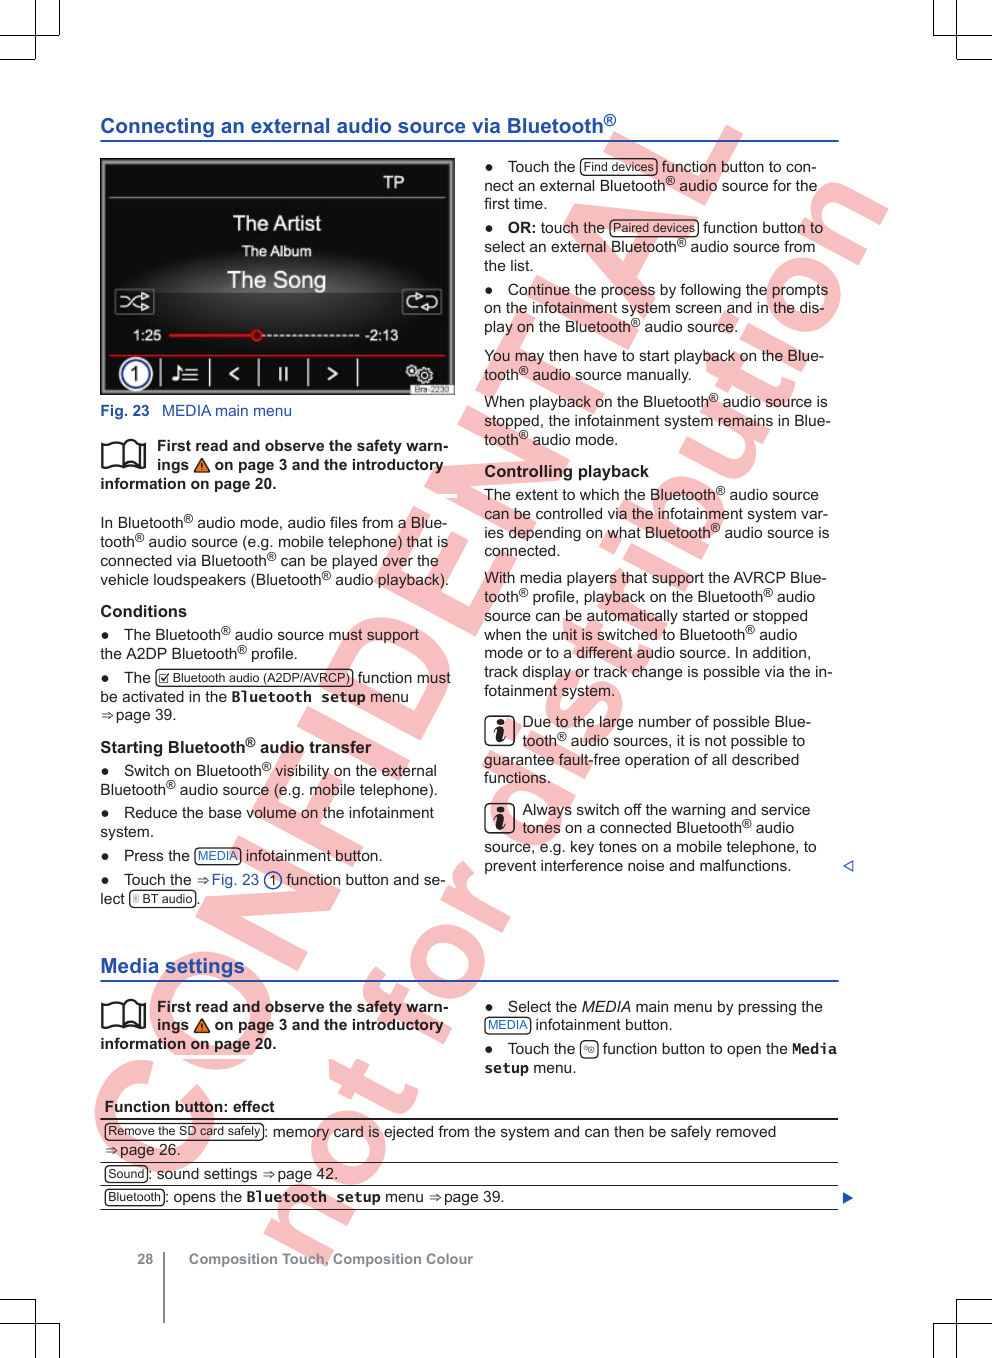  CONFIDENTIAL not for distribution Connecting an external audio source via Bluetooth®Fig. 23  MEDIA main menuFirst read and observe the safety warn-ings   on page 3 and the introductoryinformation on page 20.In Bluetooth® audio mode, audio files from a Blue-tooth® audio source (e.g. mobile telephone) that isconnected via Bluetooth® can be played over thevehicle loudspeakers (Bluetooth® audio playback).Conditions●The Bluetooth® audio source must supportthe A2DP Bluetooth® profile.●The   Bluetooth audio (A2DP/AVRCP)  function mustbe activated in the Bluetooth setup menu⇒ page 39.Starting Bluetooth® audio transfer● Switch on Bluetooth® visibility on the externalBluetooth® audio source (e.g. mobile telephone).● Reduce the base volume on the infotainmentsystem.● Press the  MEDIA  infotainment button.● Touch the ⇒ Fig. 23  1 function button and se-lect   BT audio .● Touch the  Find devices  function button to con-nect an external Bluetooth® audio source for thefirst time.●OR: touch the  Paired devices  function button toselect an external Bluetooth® audio source fromthe list.● Continue the process by following the promptson the infotainment system screen and in the dis-play on the Bluetooth® audio source.You may then have to start playback on the Blue-tooth® audio source manually.When playback on the Bluetooth® audio source isstopped, the infotainment system remains in Blue-tooth® audio mode.Controlling playbackThe extent to which the Bluetooth® audio sourcecan be controlled via the infotainment system var-ies depending on what Bluetooth® audio source isconnected.With media players that support the AVRCP Blue-tooth® profile, playback on the Bluetooth® audiosource can be automatically started or stoppedwhen the unit is switched to Bluetooth® audiomode or to a different audio source. In addition,track display or track change is possible via the in-fotainment system.Due to the large number of possible Blue-tooth® audio sources, it is not possible toguarantee fault-free operation of all describedfunctions.Always switch off the warning and servicetones on a connected Bluetooth® audiosource, e.g. key tones on a mobile telephone, toprevent interference noise and malfunctions. Media settingsFirst read and observe the safety warn-ings   on page 3 and the introductoryinformation on page 20.● Select the MEDIA main menu by pressing theMEDIA  infotainment button.● Touch the   function button to open the Mediasetup menu.Function button: effectRemove the SD card safely : memory card is ejected from the system and can then be safely removed⇒ page 26.Sound : sound settings ⇒ page 42.Bluetooth : opens the Bluetooth setup menu ⇒ page 39. Composition Touch, Composition Colour28